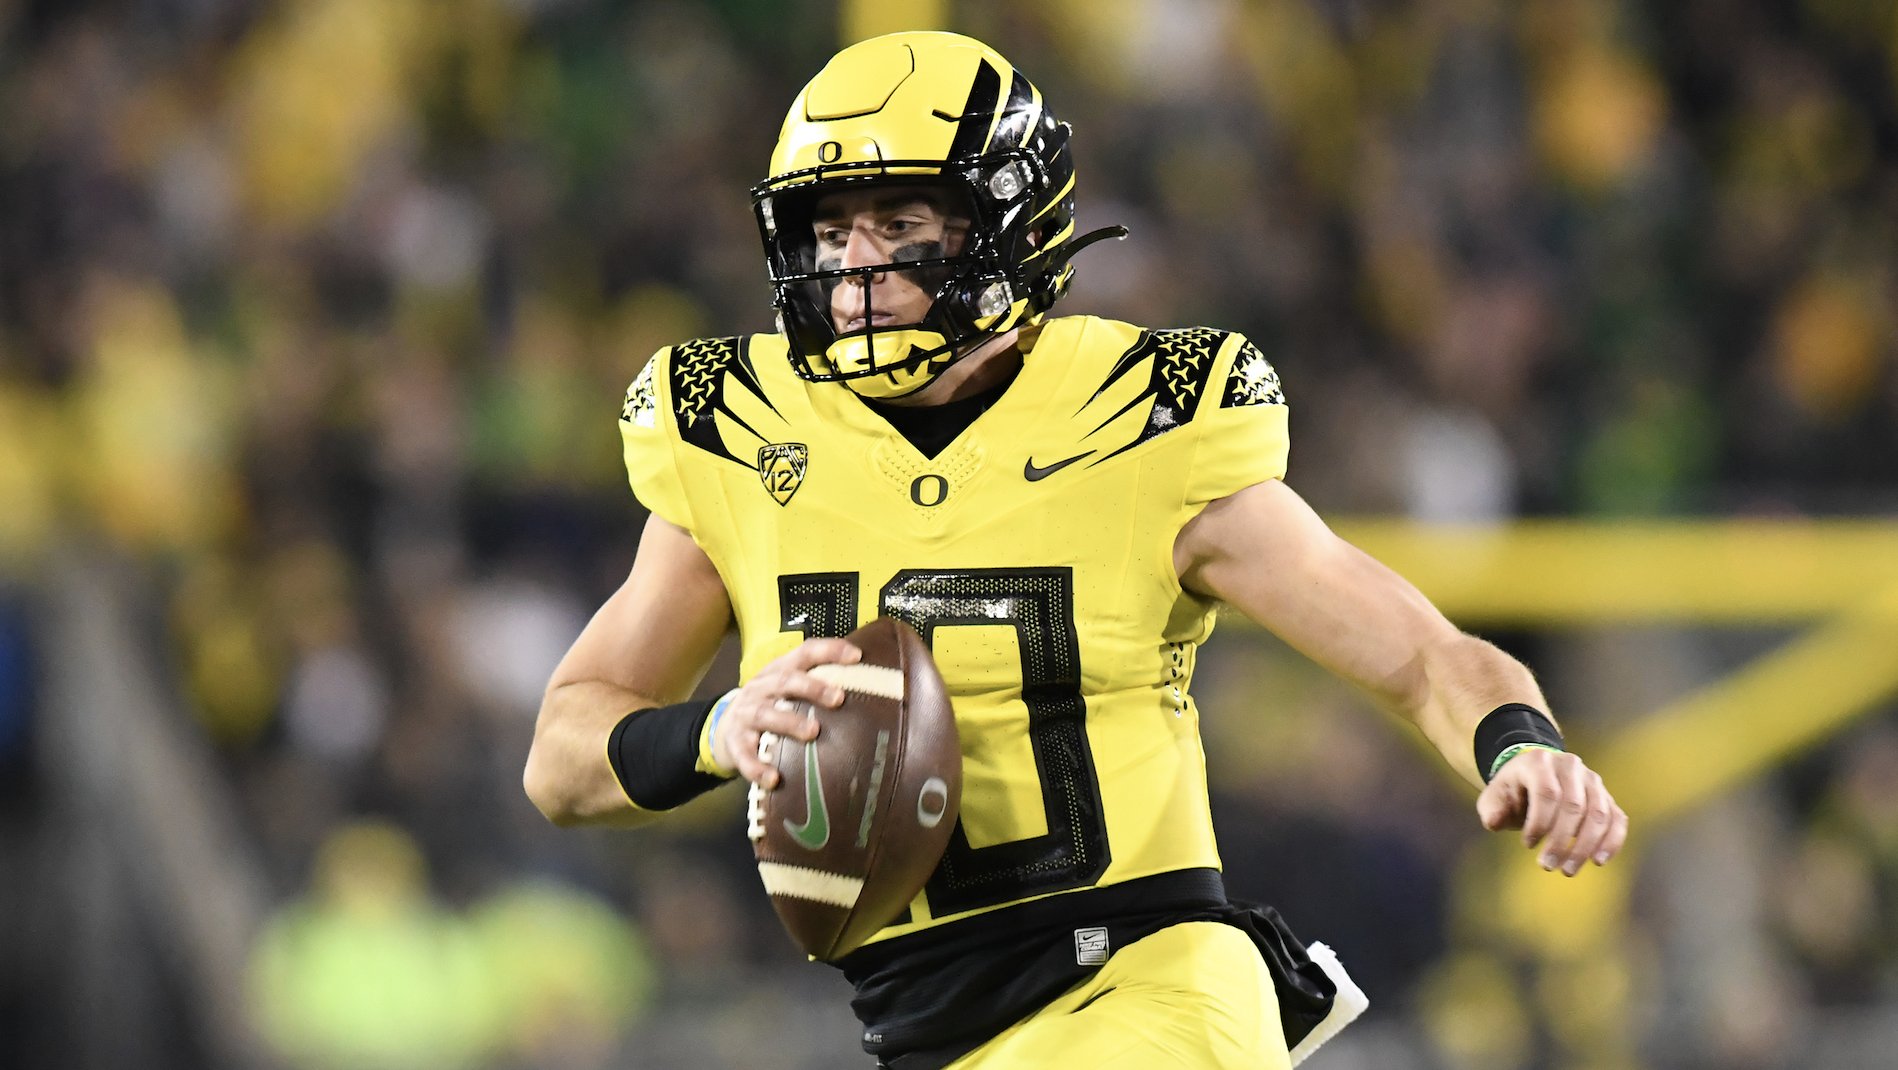 247Sports on X: 'College football's 30 best uniforms ahead of 2023